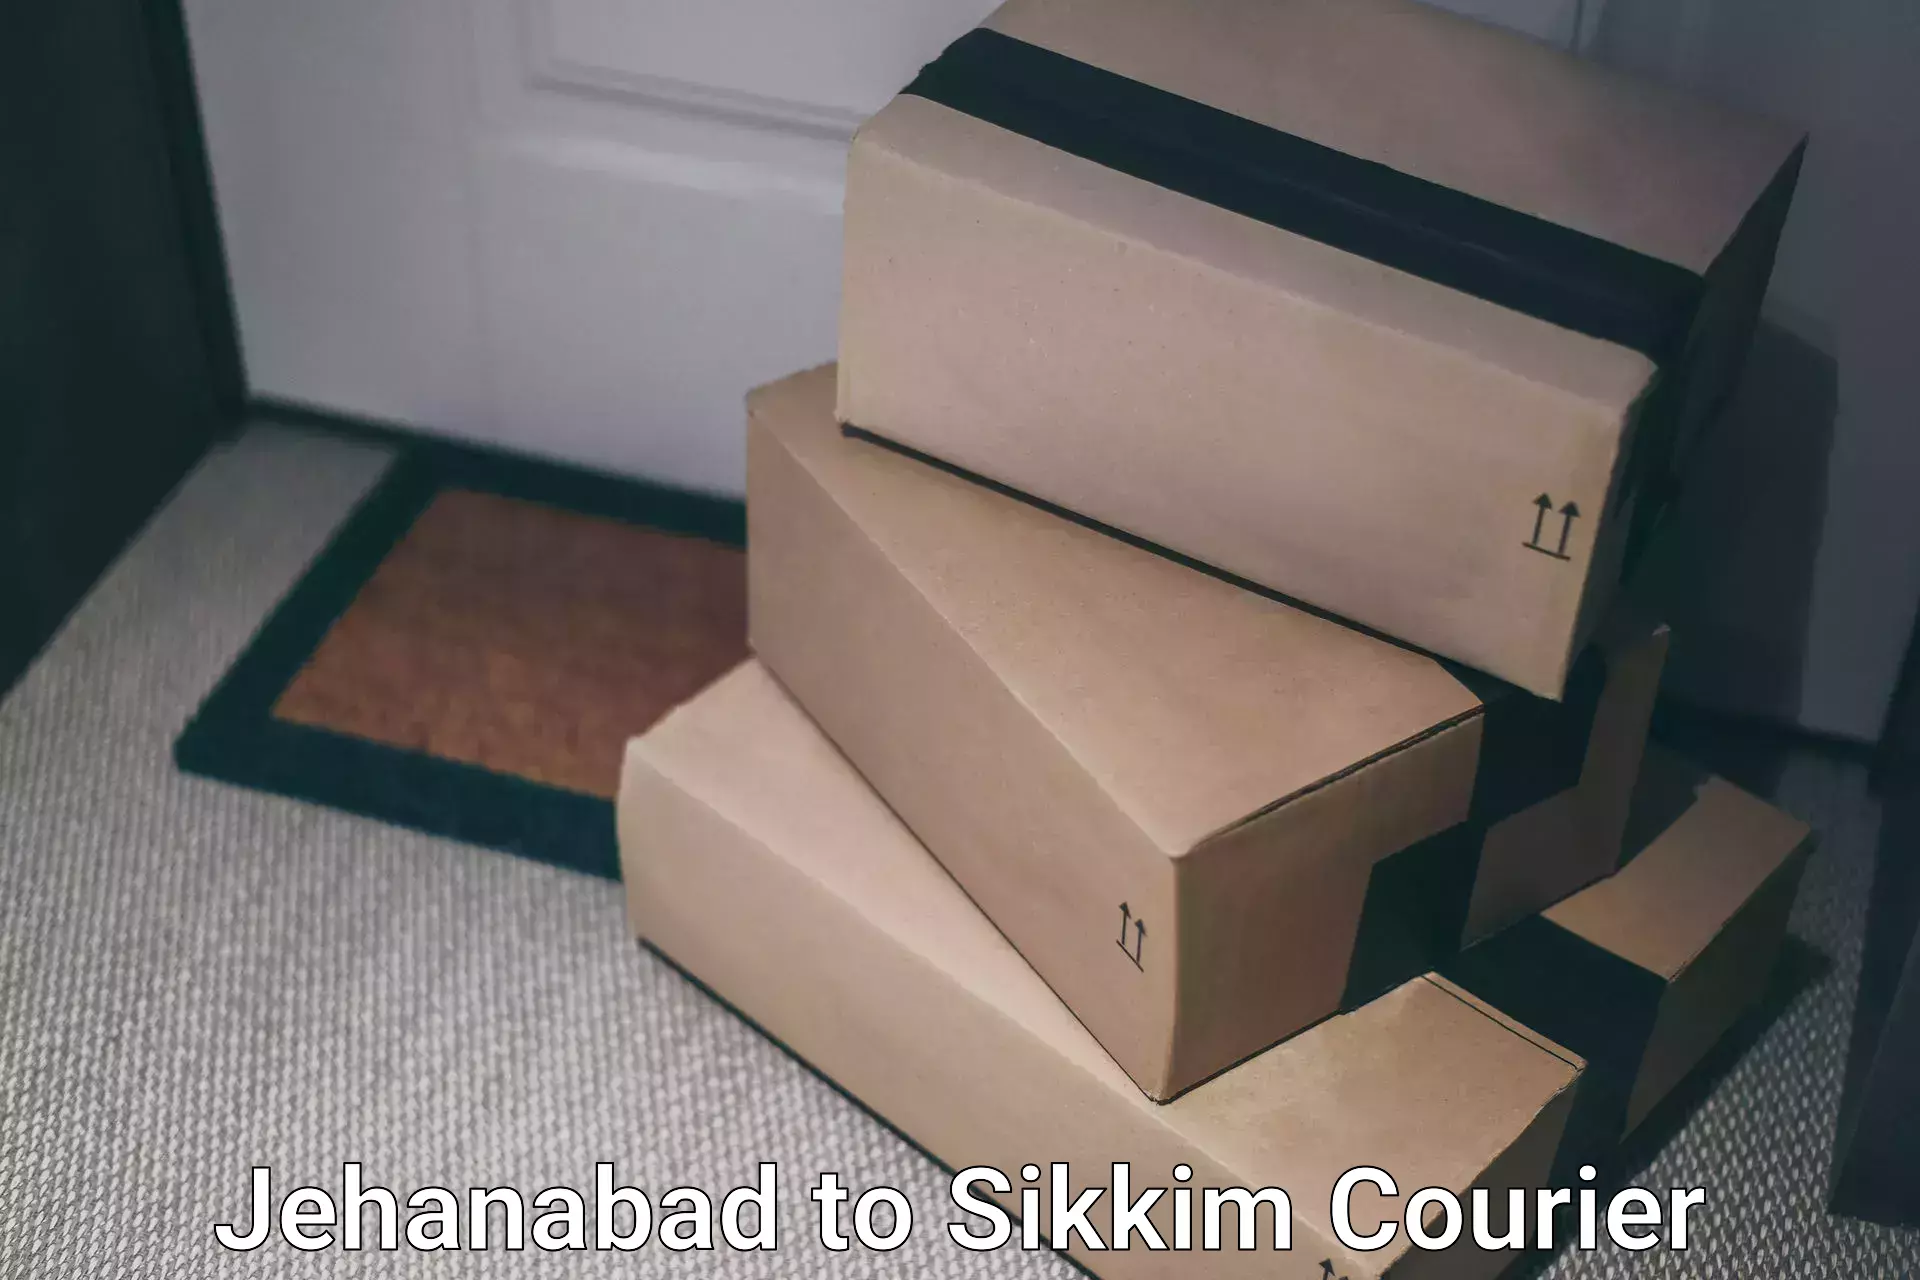 Seamless shipping experience Jehanabad to Sikkim